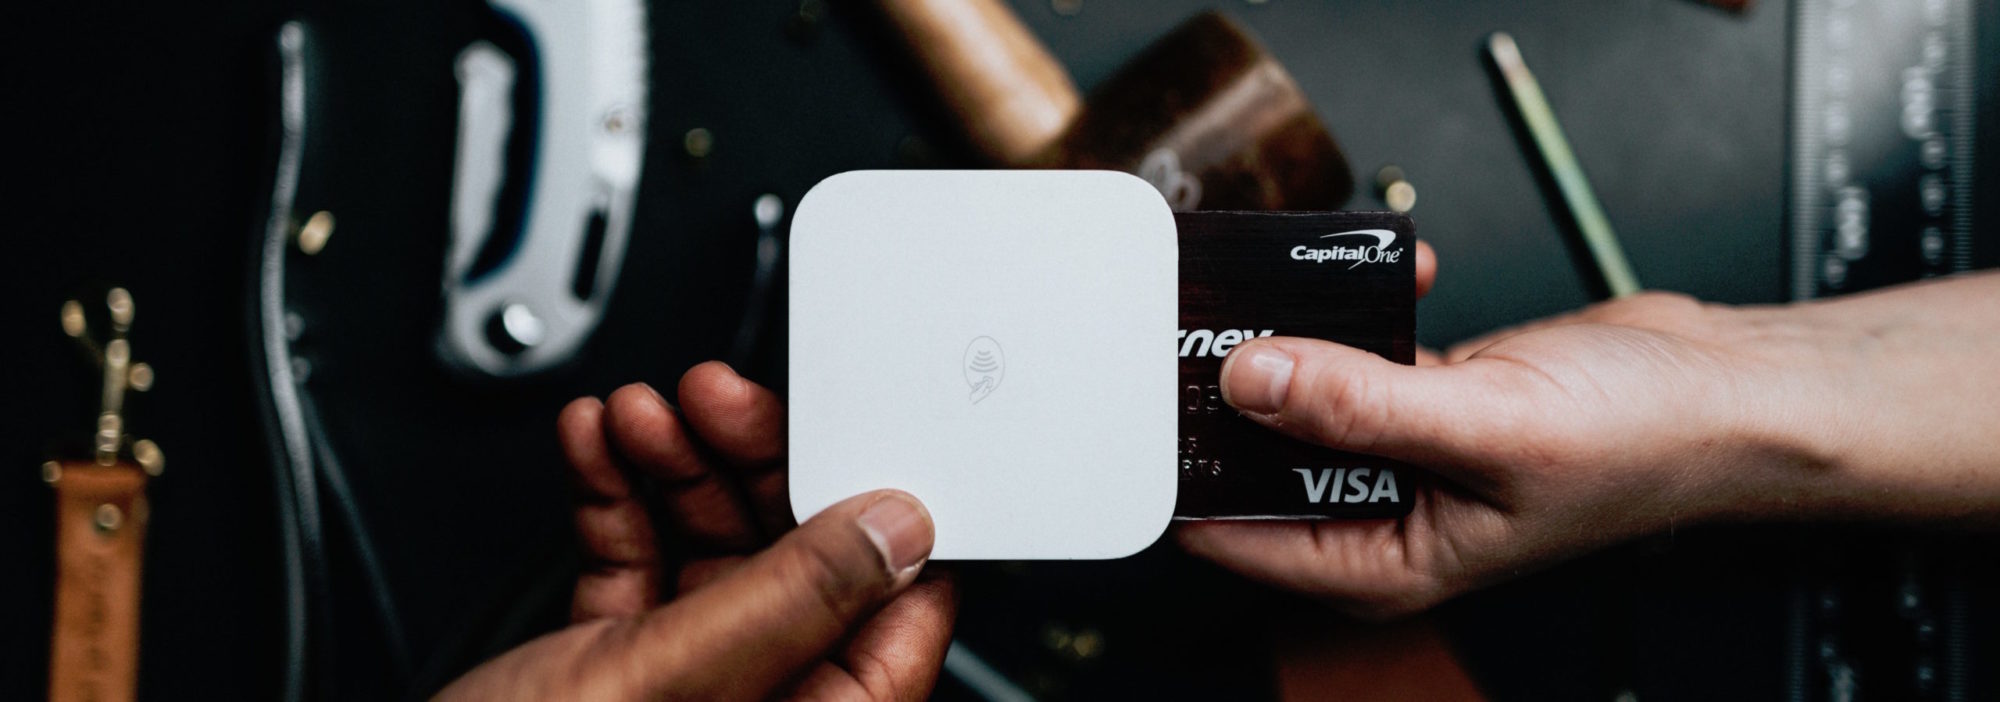 Jeremy Layton, CEO of Verisave has a few things you need to know about credit card processing fees and your business. Access them in this free webinar.